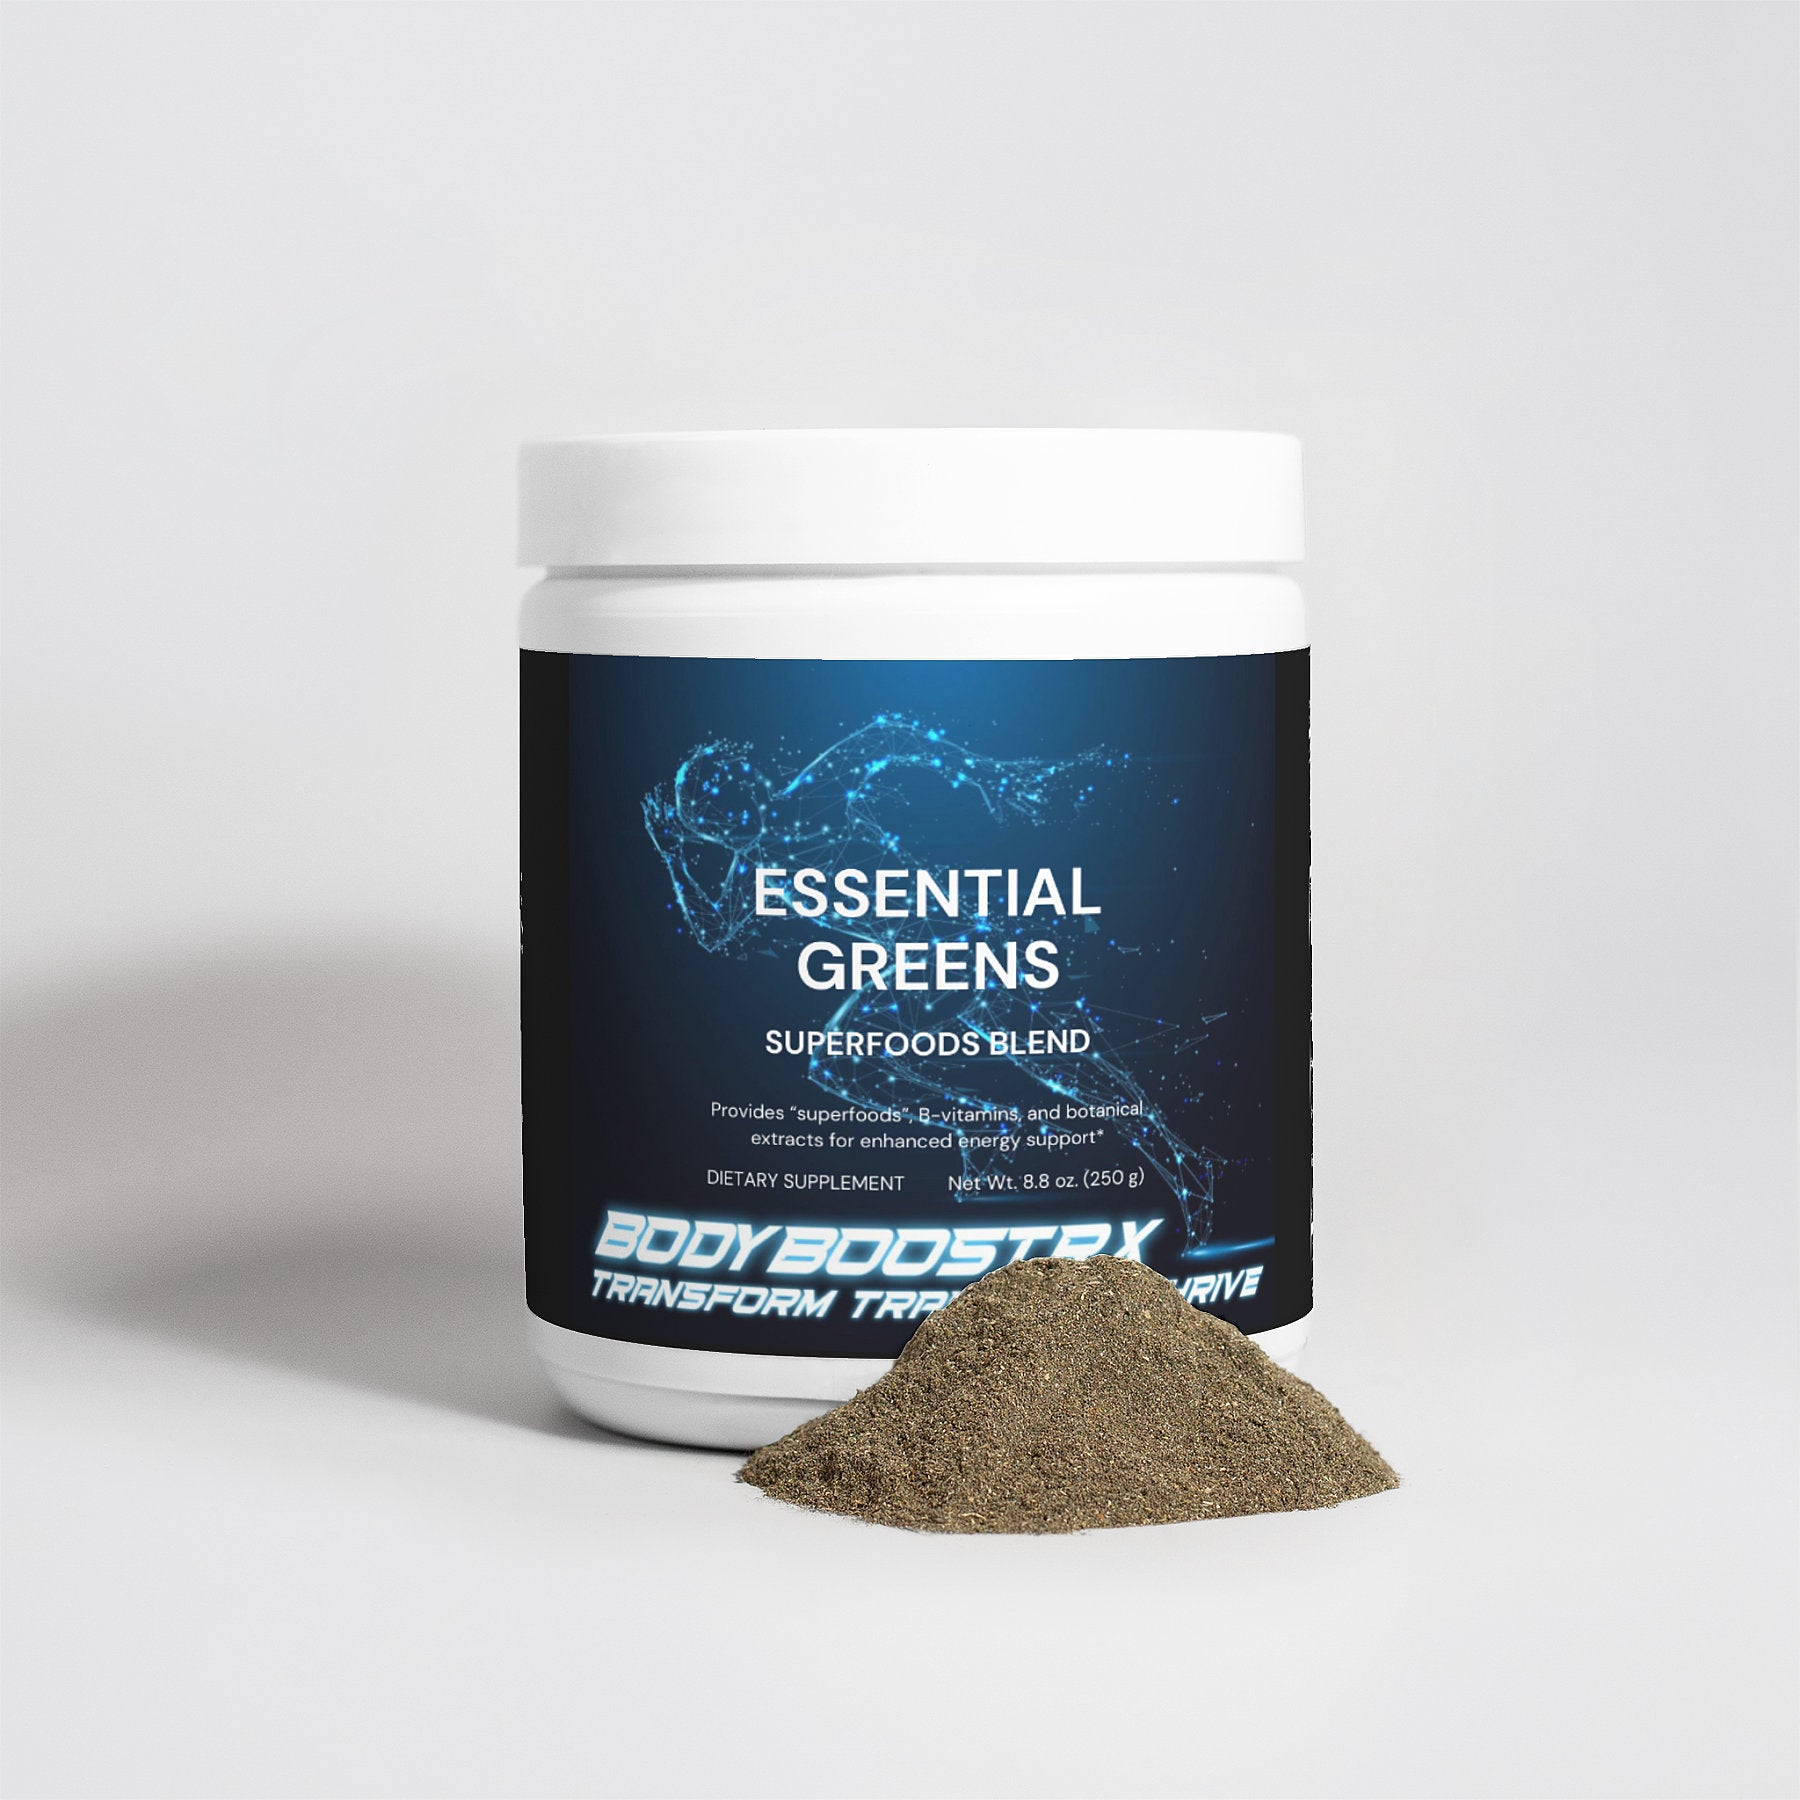 ESSENTIAL GREENS SUPERFOODS BLEND PACKAGE FRONT With A Daily Amount Of Powder